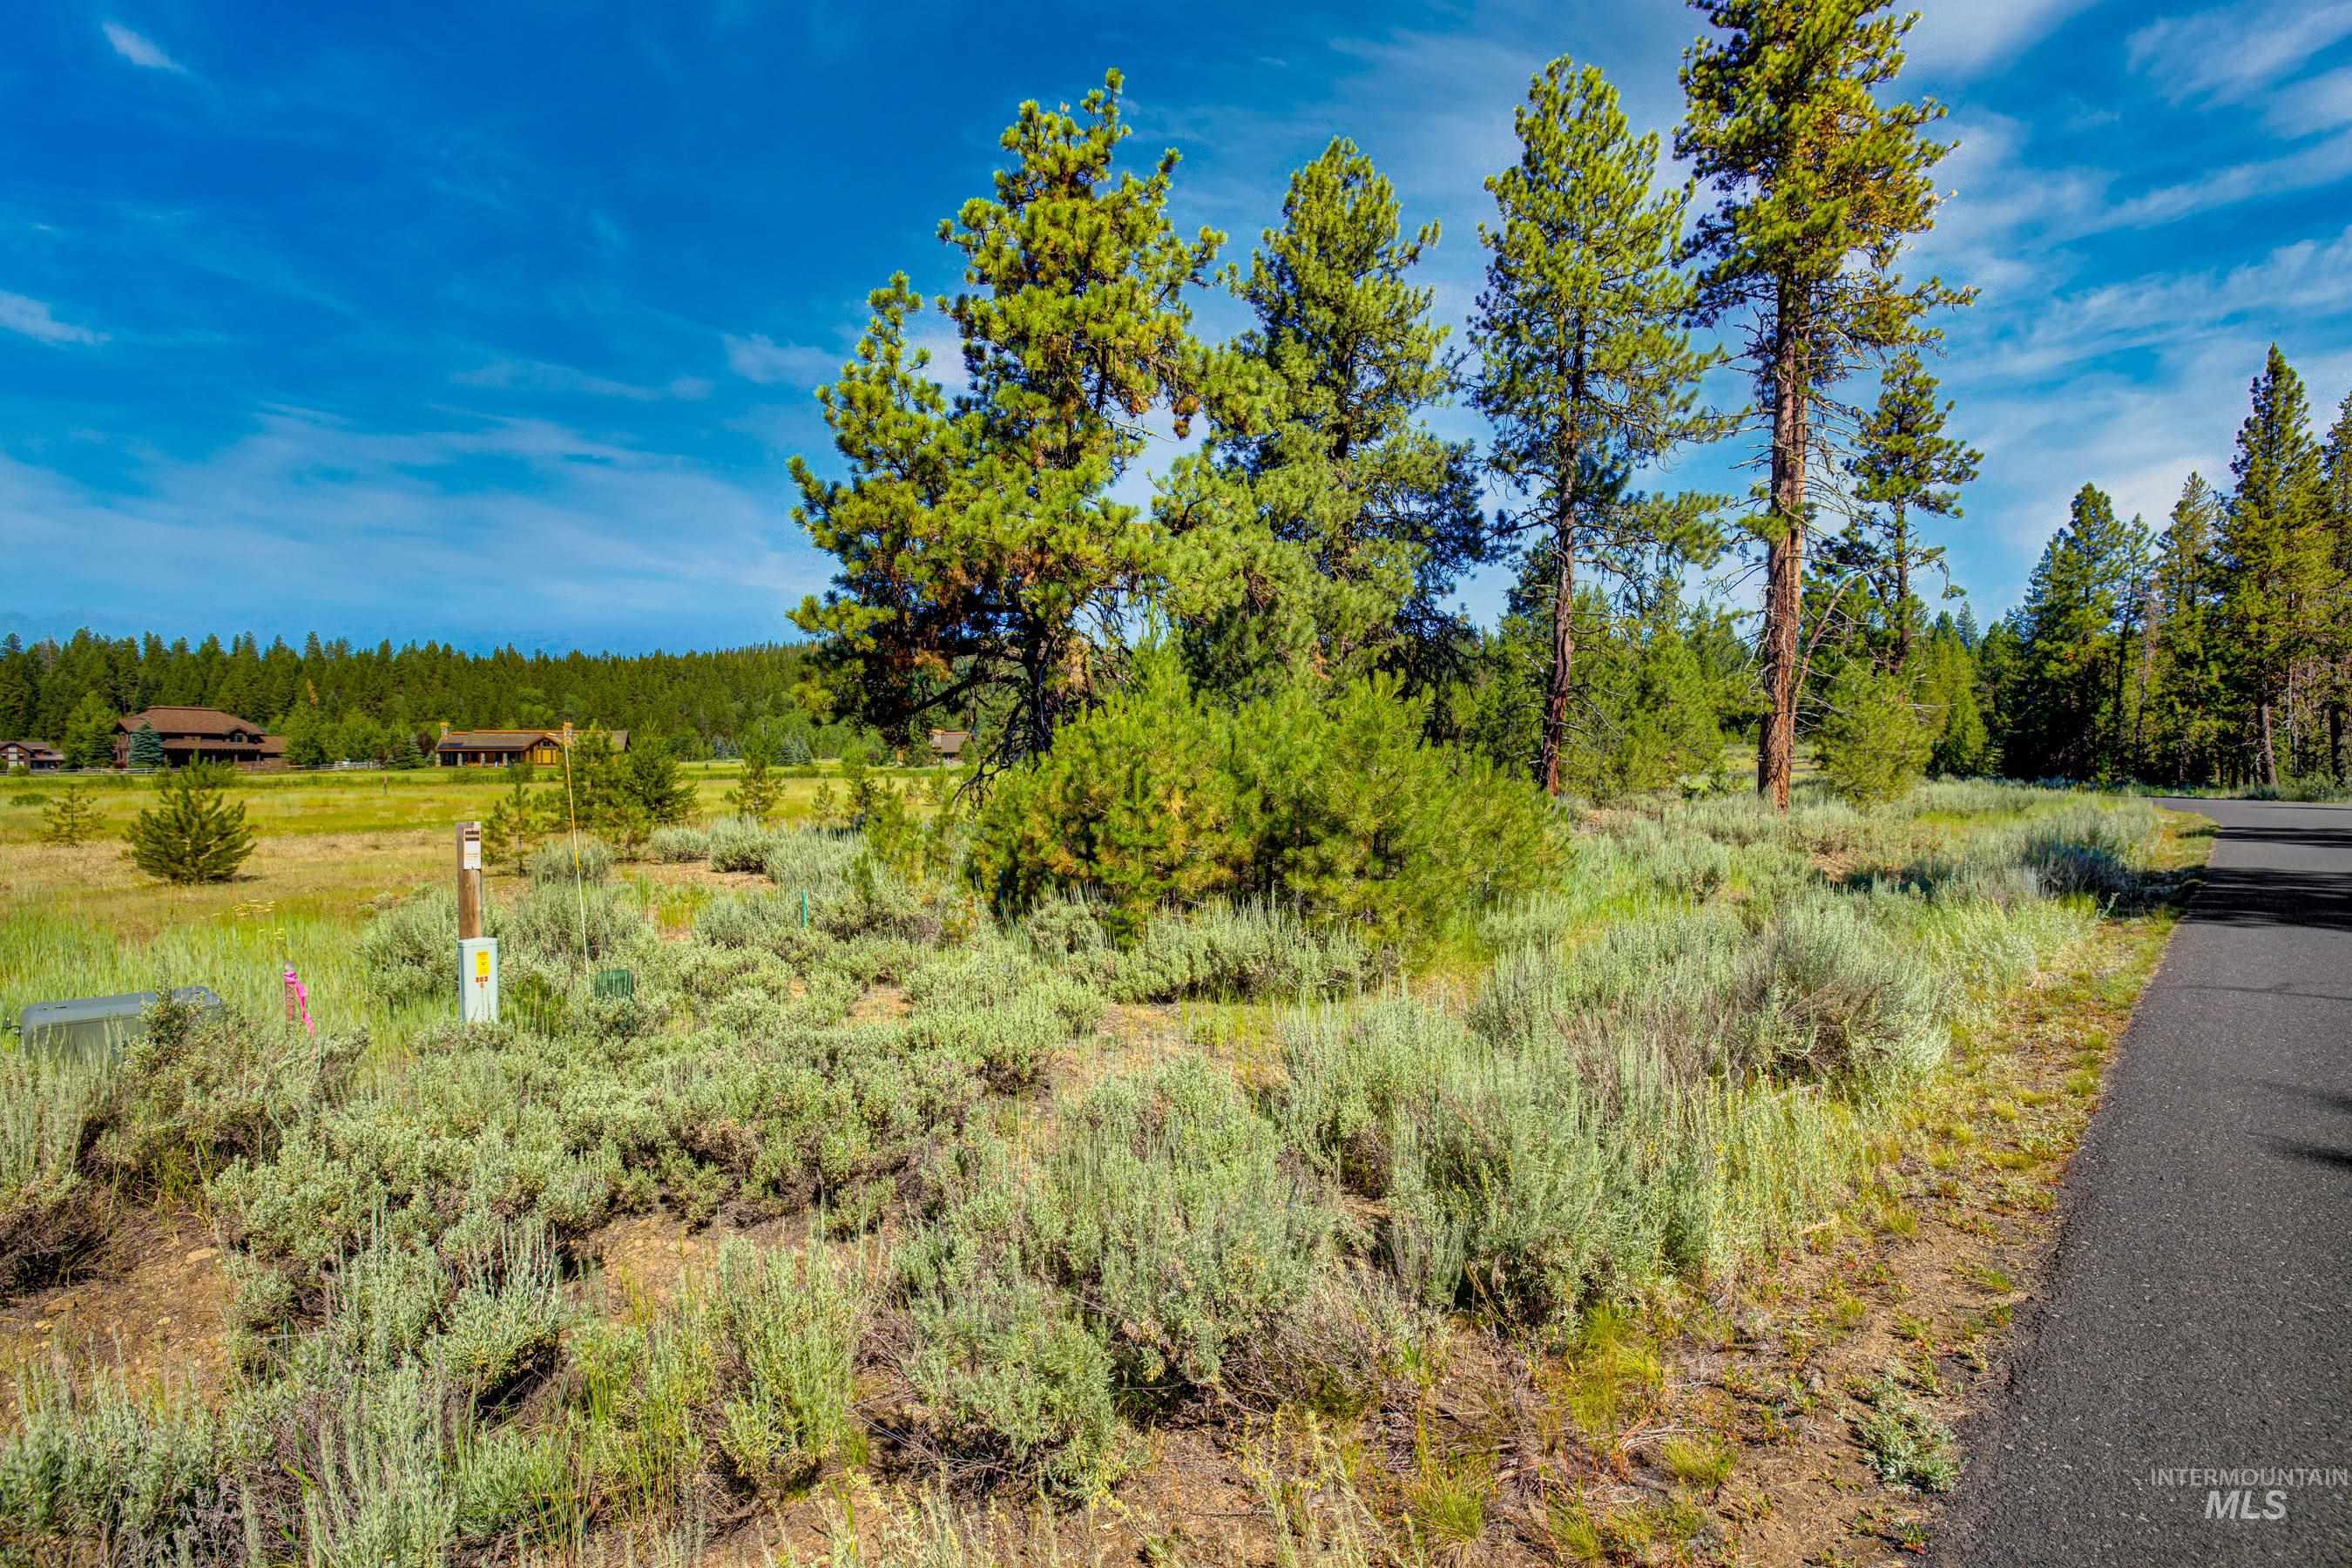 86 Fawnlilly, McCall, Idaho 83638, Land For Sale, Price $235,000,MLS 98908870